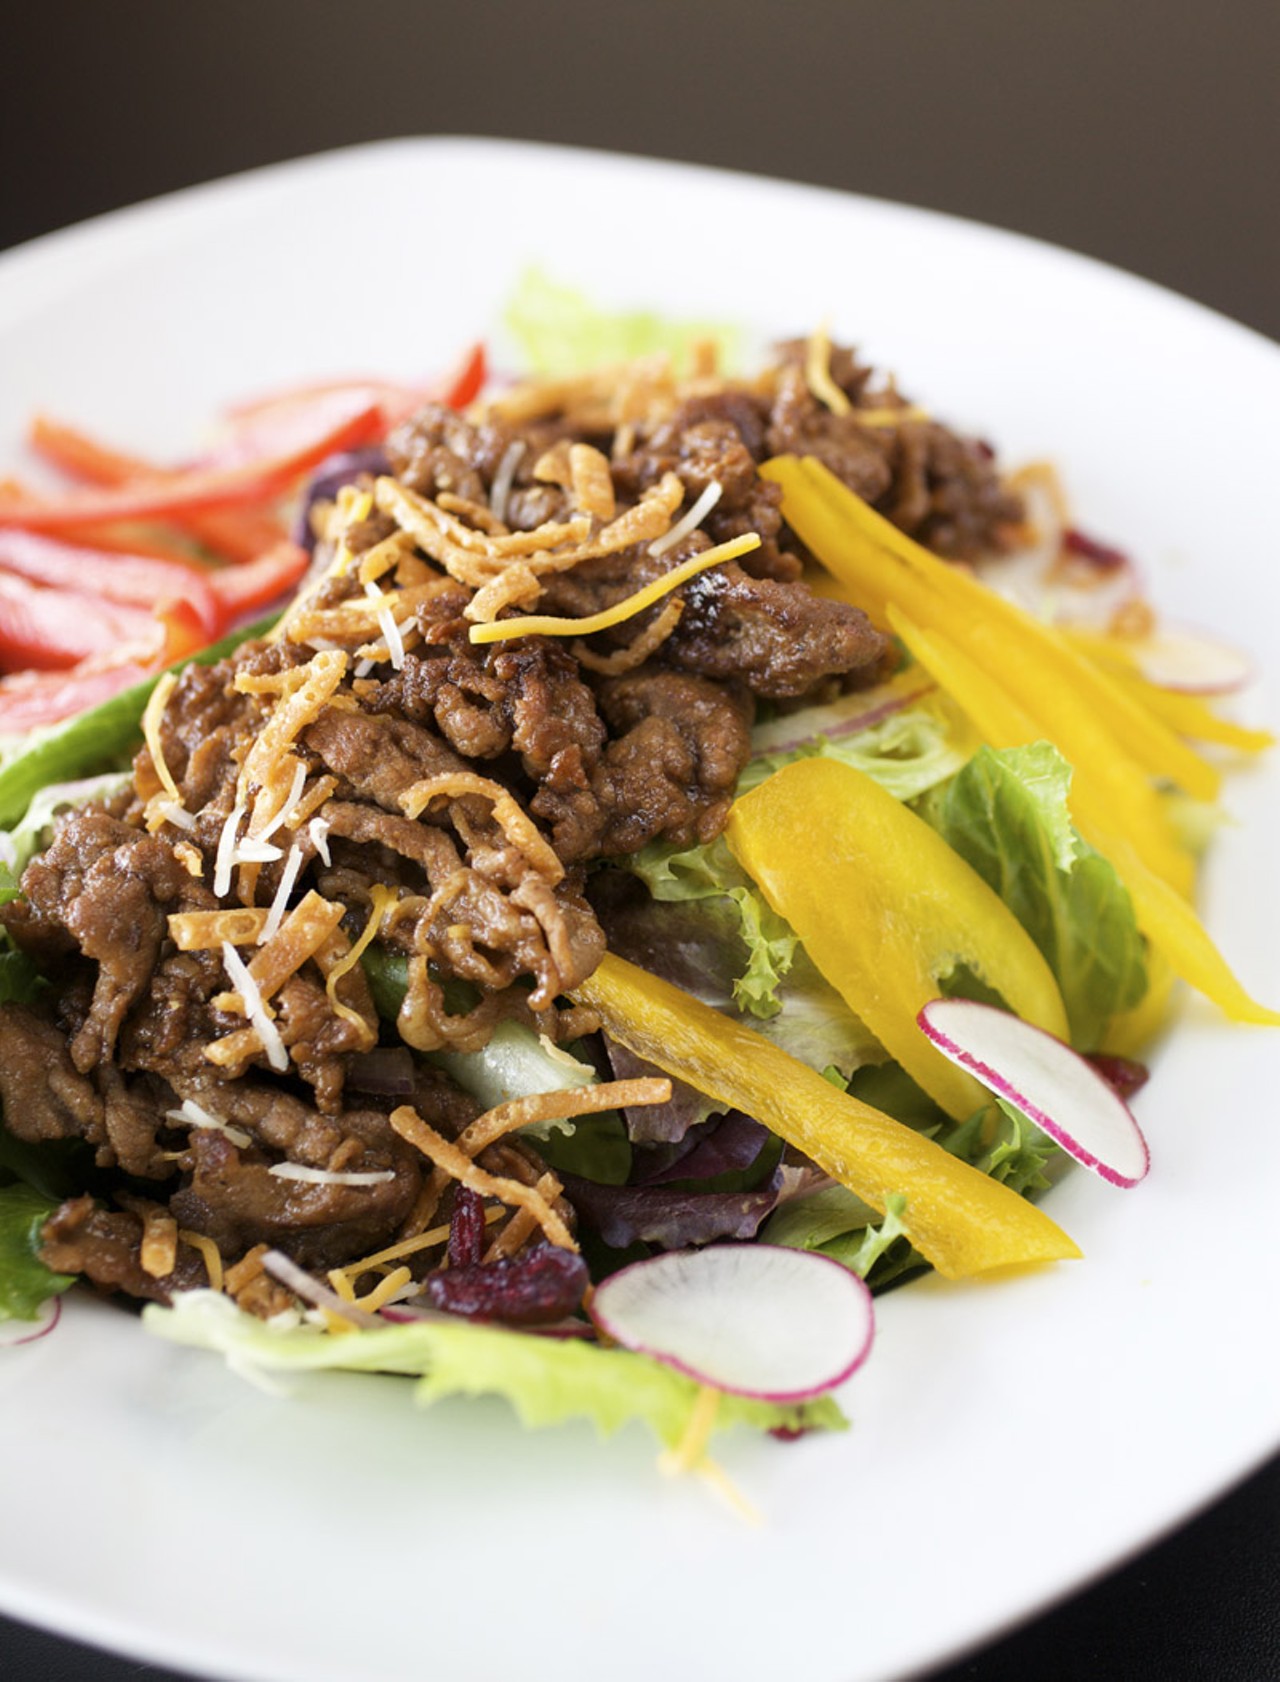 The Beef Bulgoki Salad is one of three salads available at O! Wing Plus.